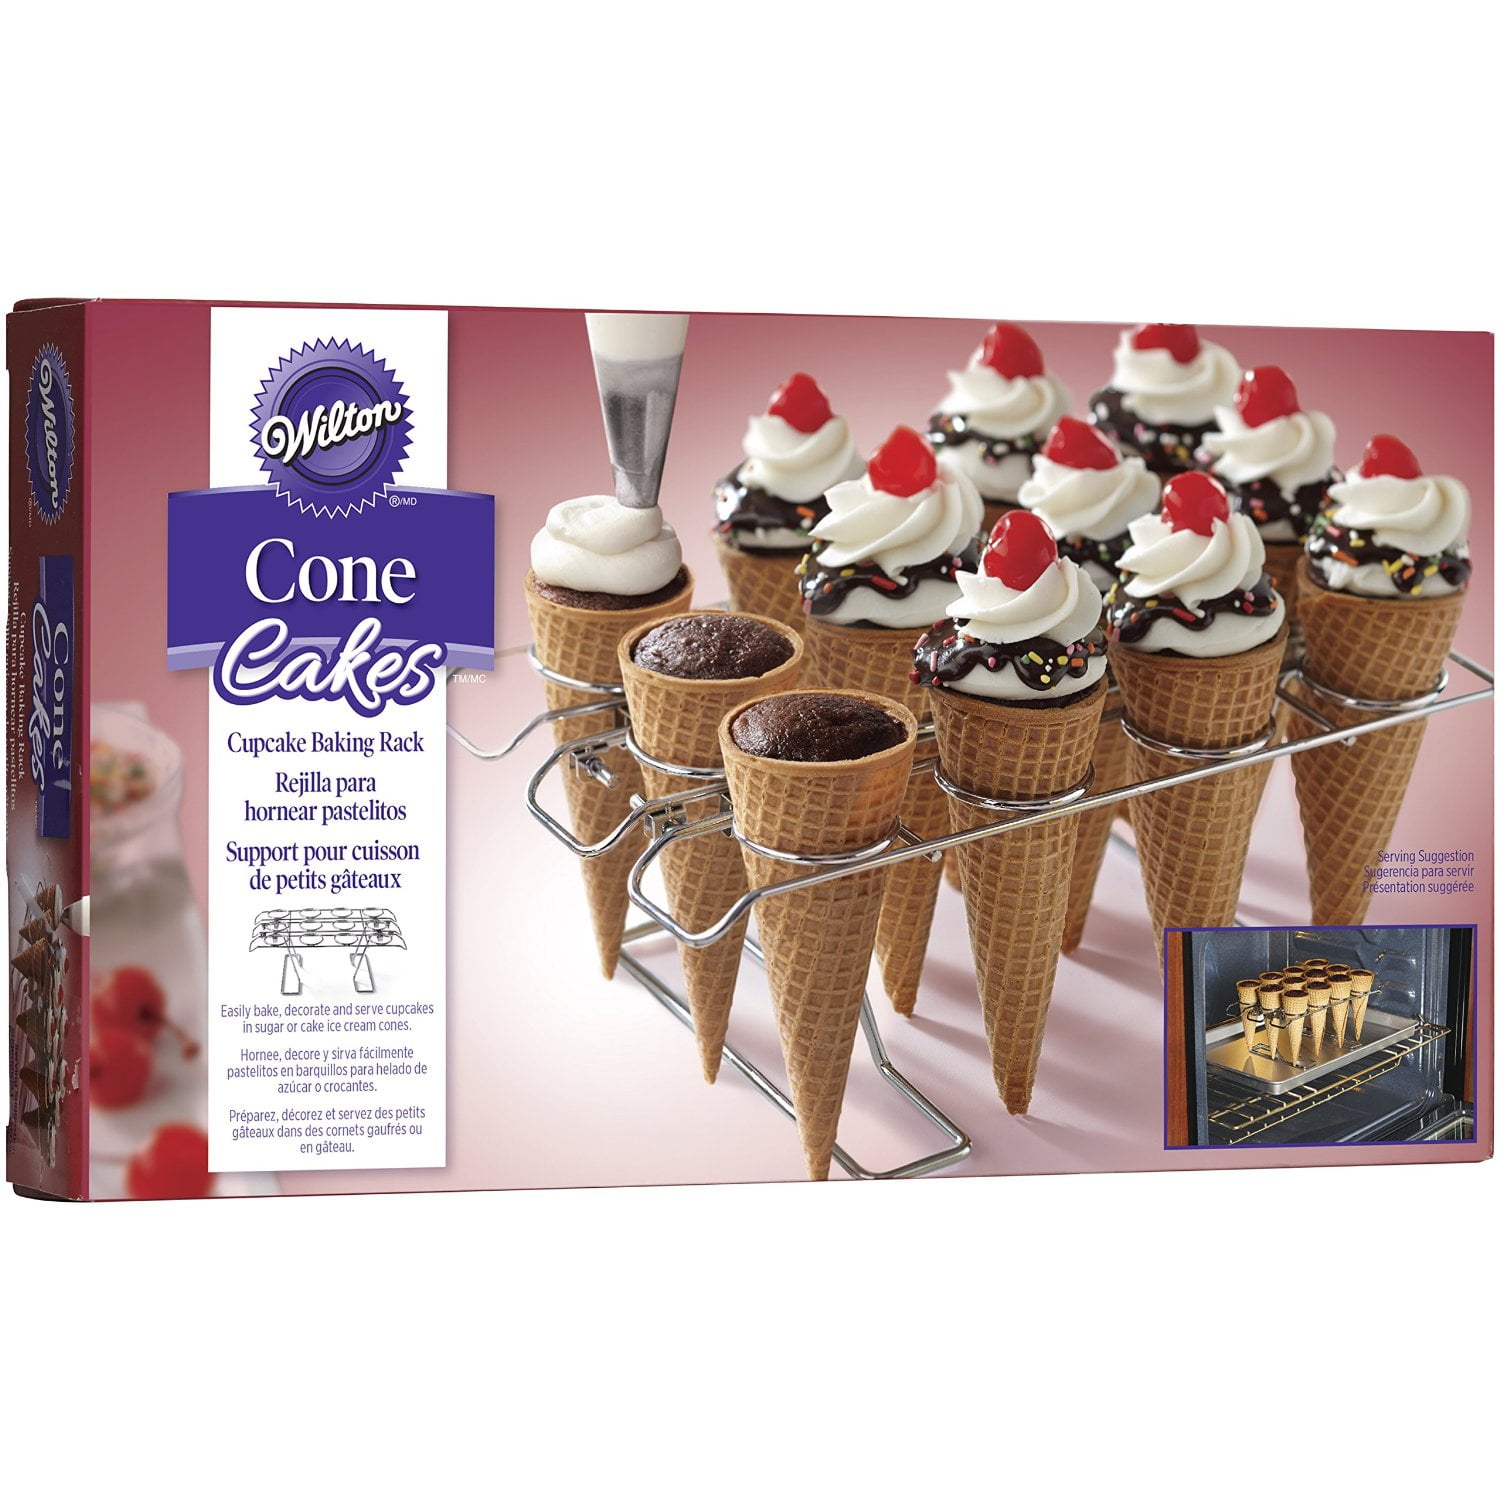 Stainless Steel Ice Cream Cone Stand Holder Display Cooling Cake Foldable Cake Decorating Pastry Tray Cupcake 16 Cone Baking Rack